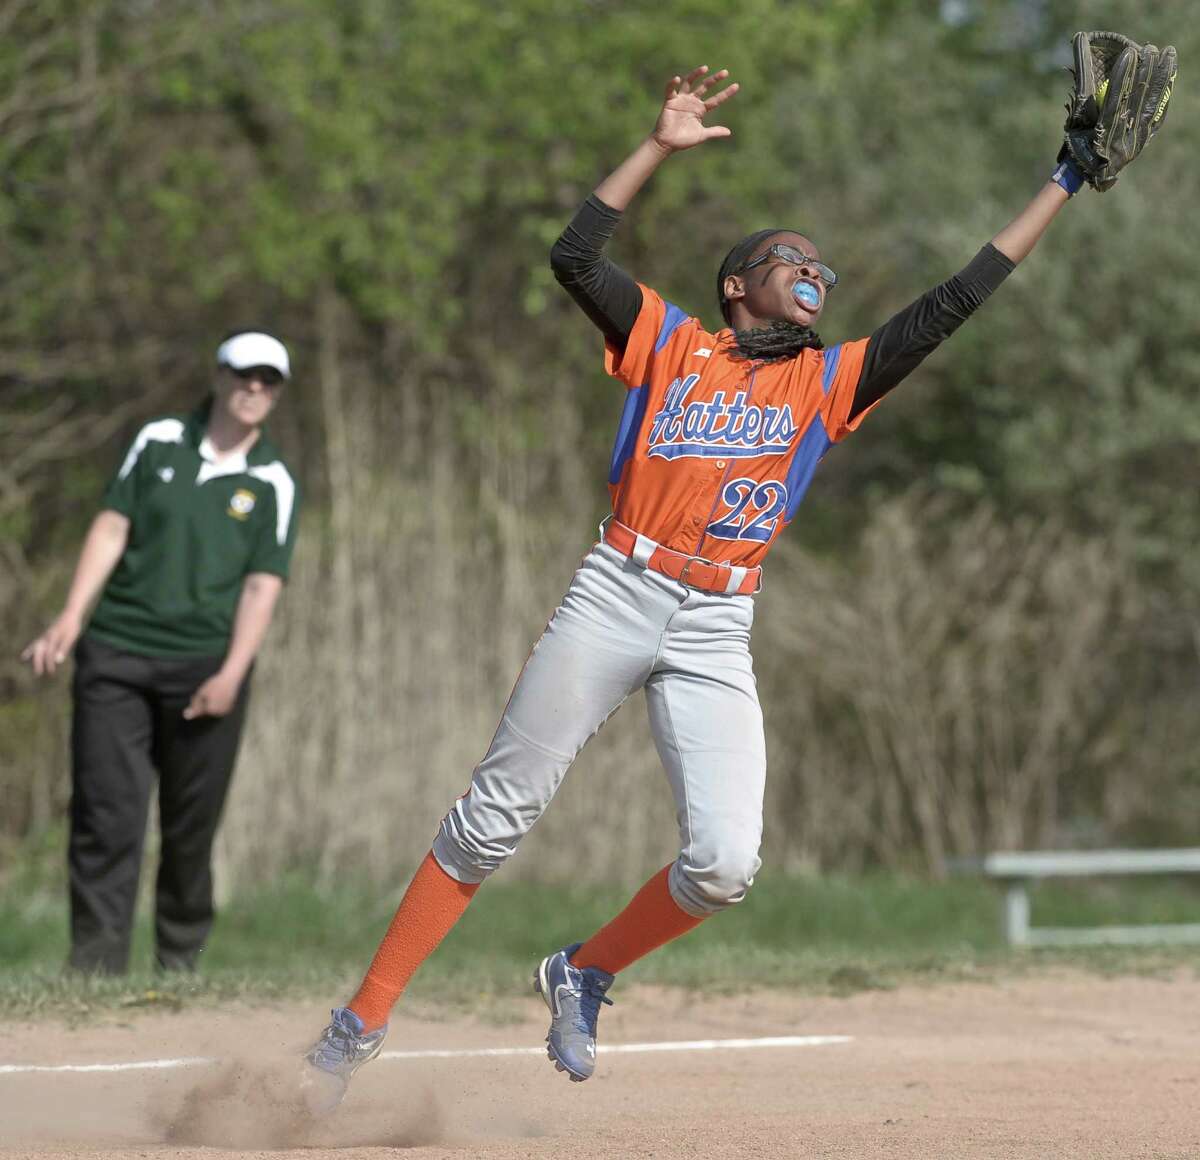 Danbury's Davonna Spruill (22) catches a pop up bunt during the girls high school softball game between Trinity Catholic and Danbury high schools on Friday, May 8, 2015, played at Danbury High School, in Danbury, Conn.